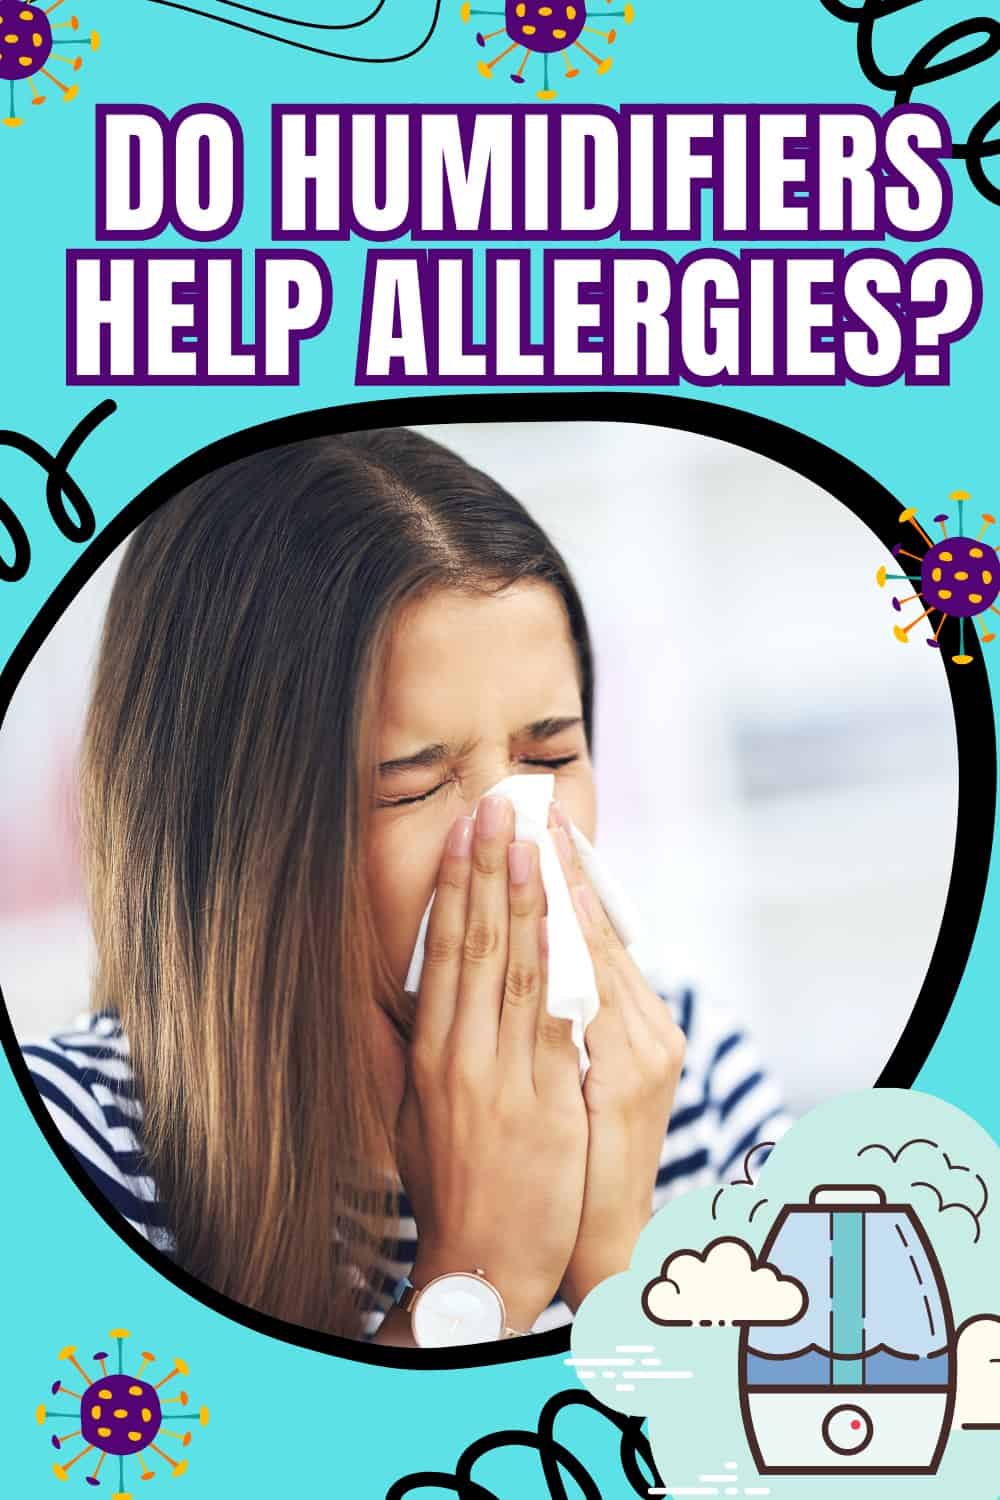 Humidifiers can help with allergies